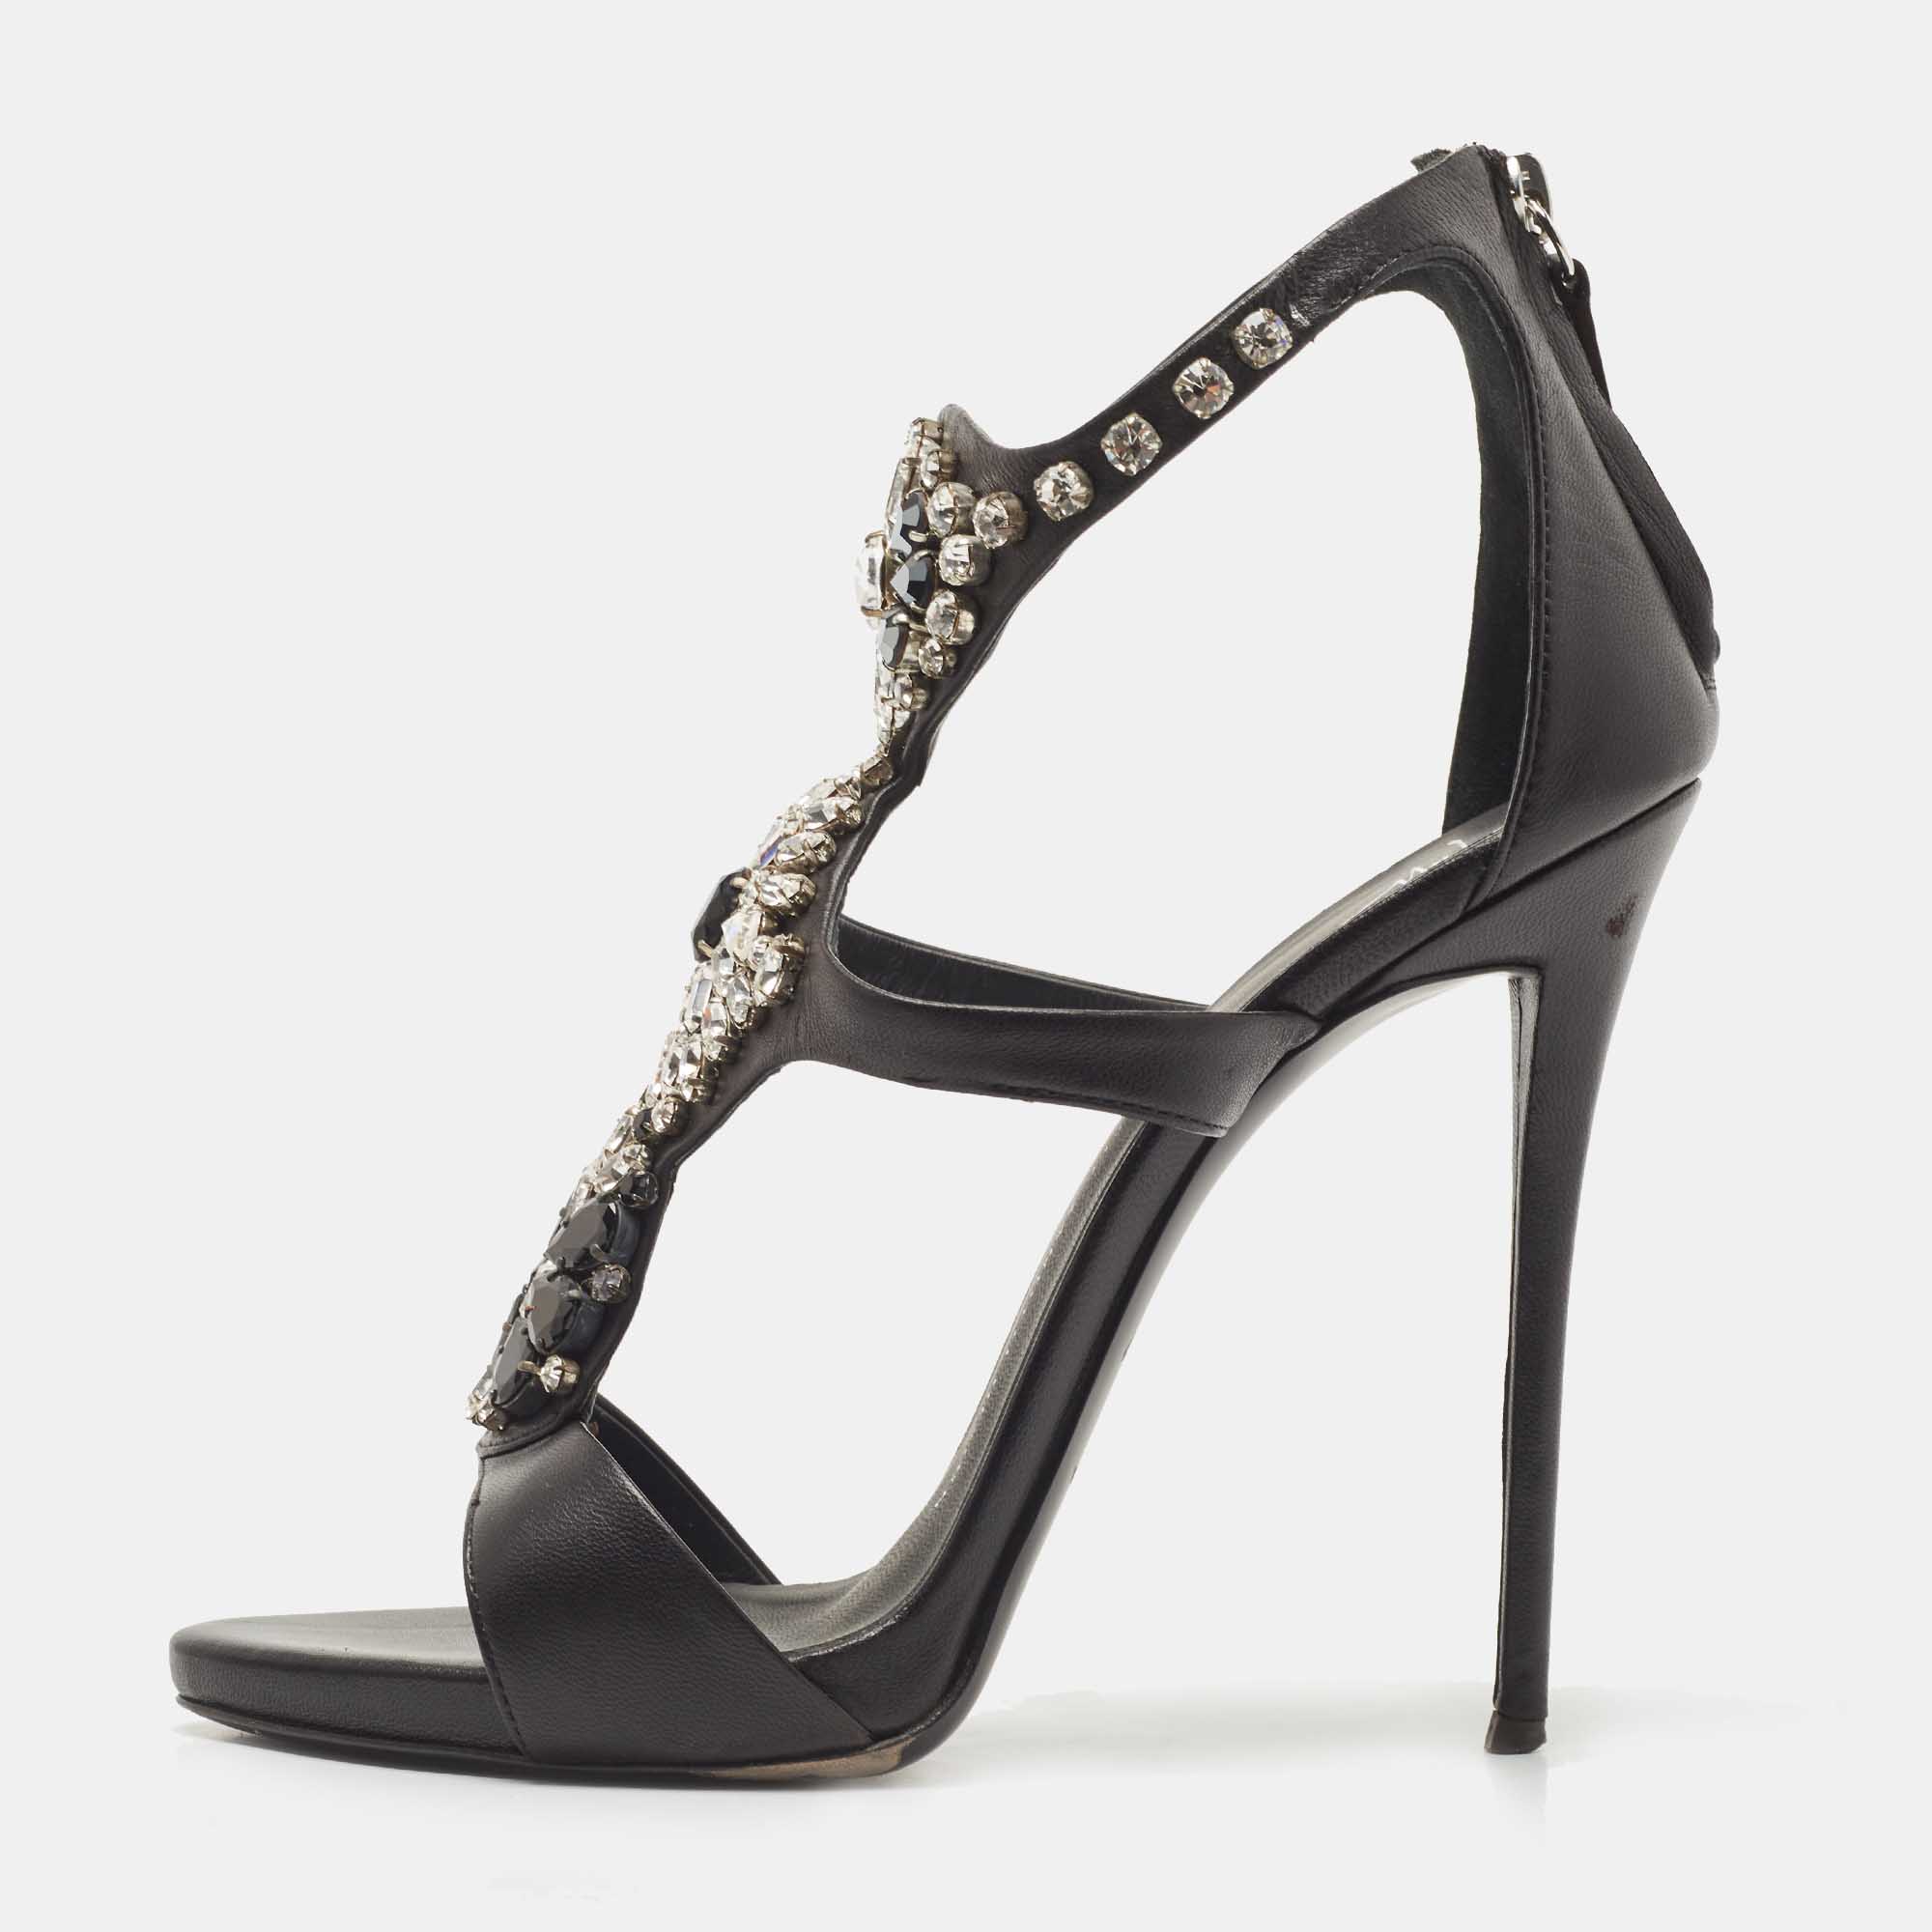 Pre-owned Giuseppe Zanotti Black Leather Crystal Embellished Strappy Sandals Size 39